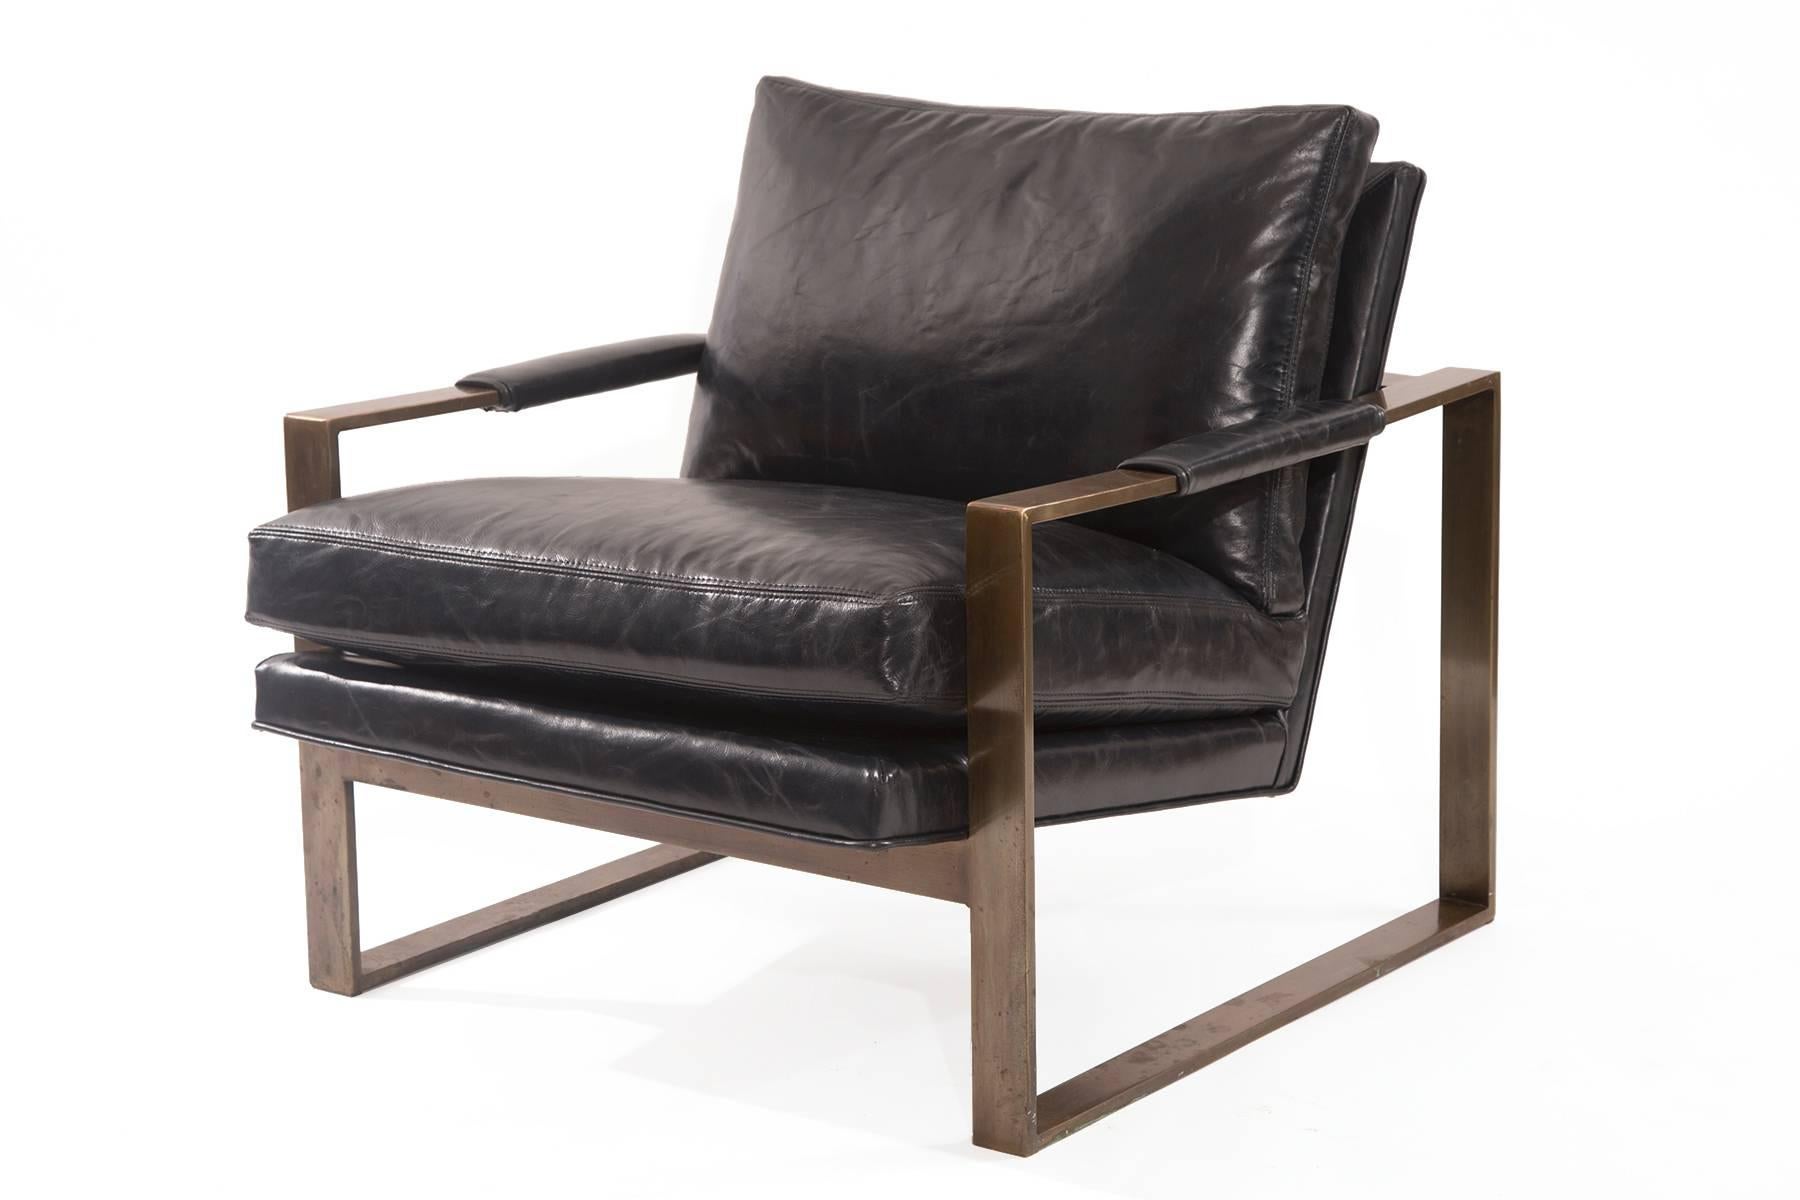 Bronze and leather lounge chair by Milo Baughman for Thayer Coggin, circa early 1970s. This lovely example has a patinated bronze frame and has been newly upholstered in a stunning down filled navy leather. Extremely comfortable.